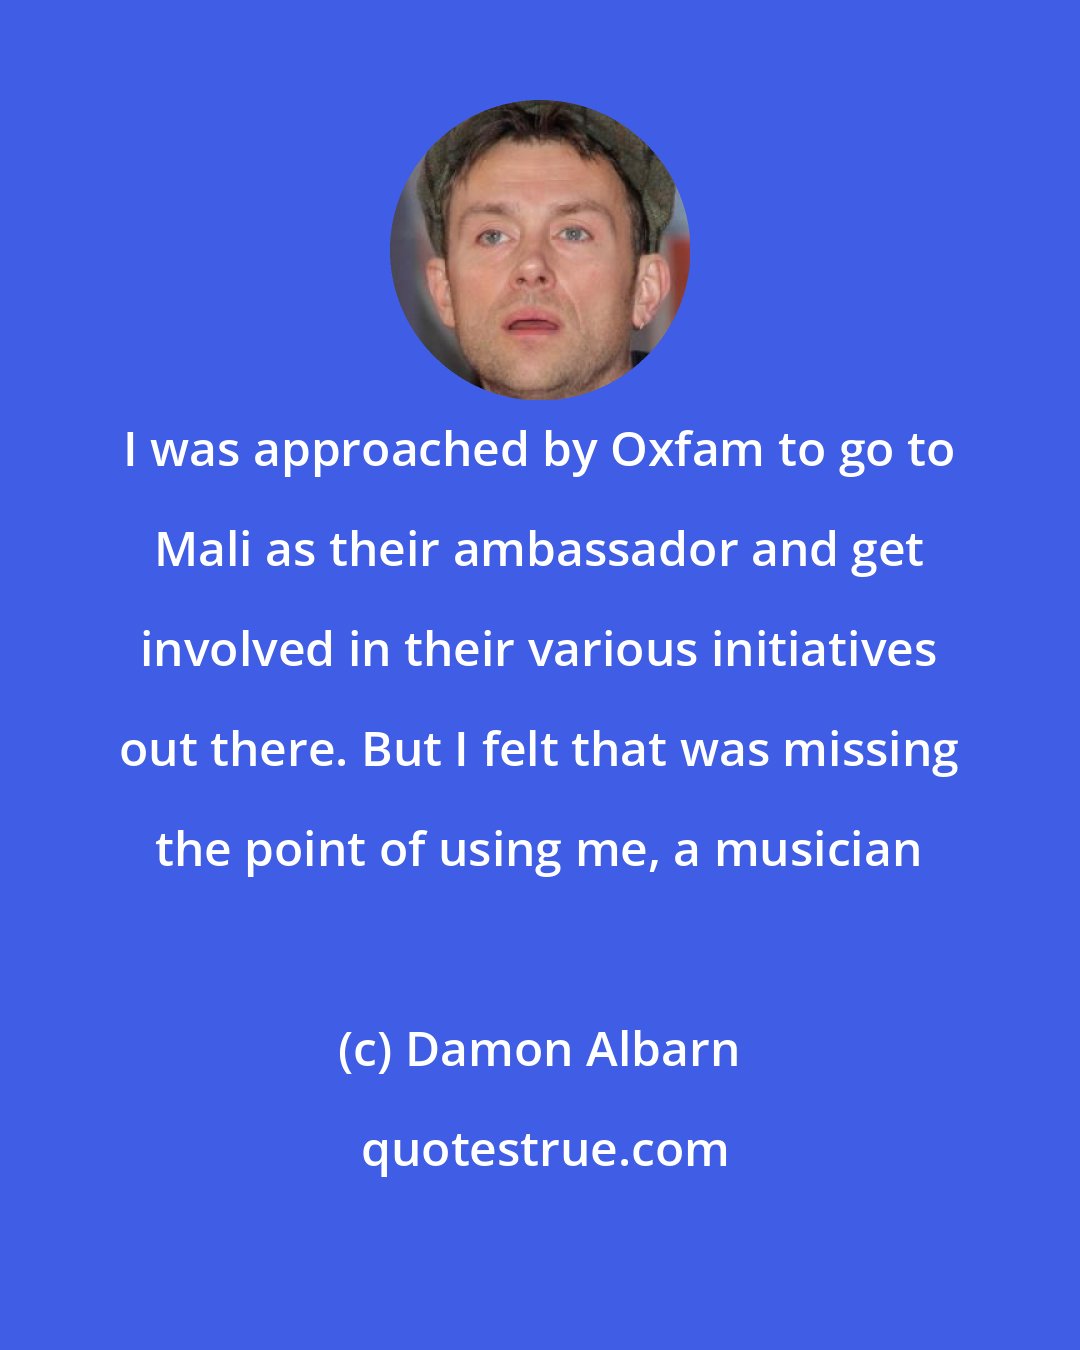 Damon Albarn: I was approached by Oxfam to go to Mali as their ambassador and get involved in their various initiatives out there. But I felt that was missing the point of using me, a musician